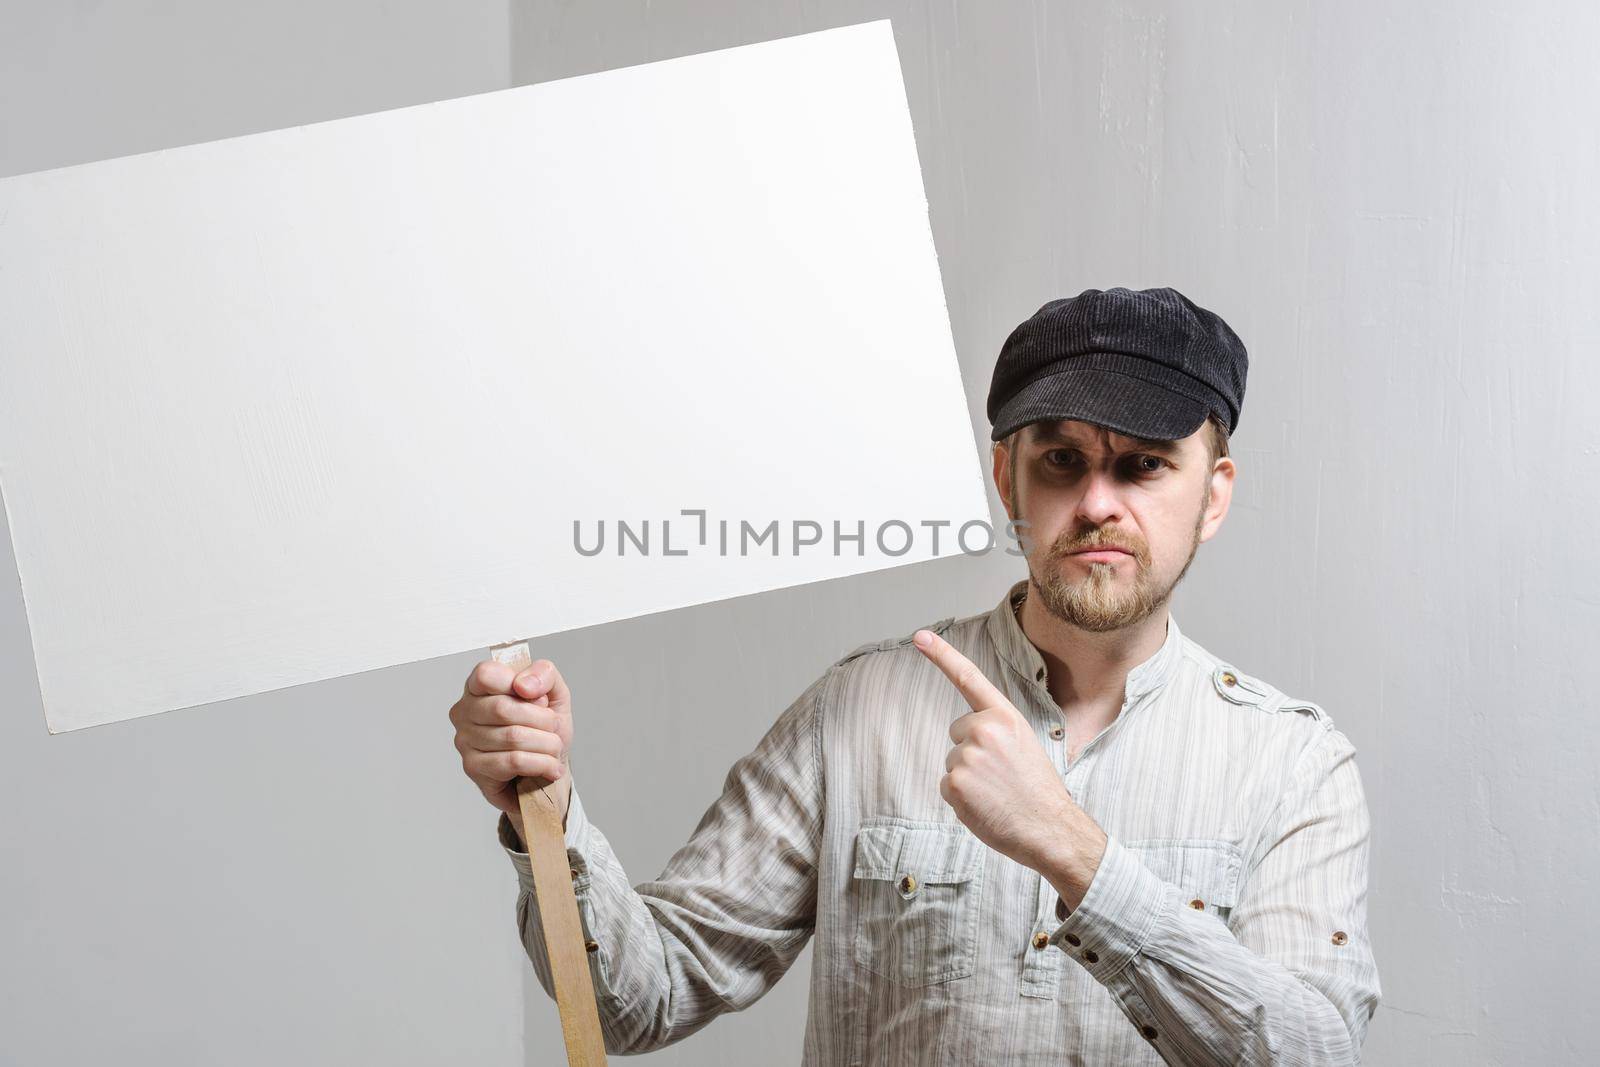 Work young man points finger on a blank banner - isolated on white.